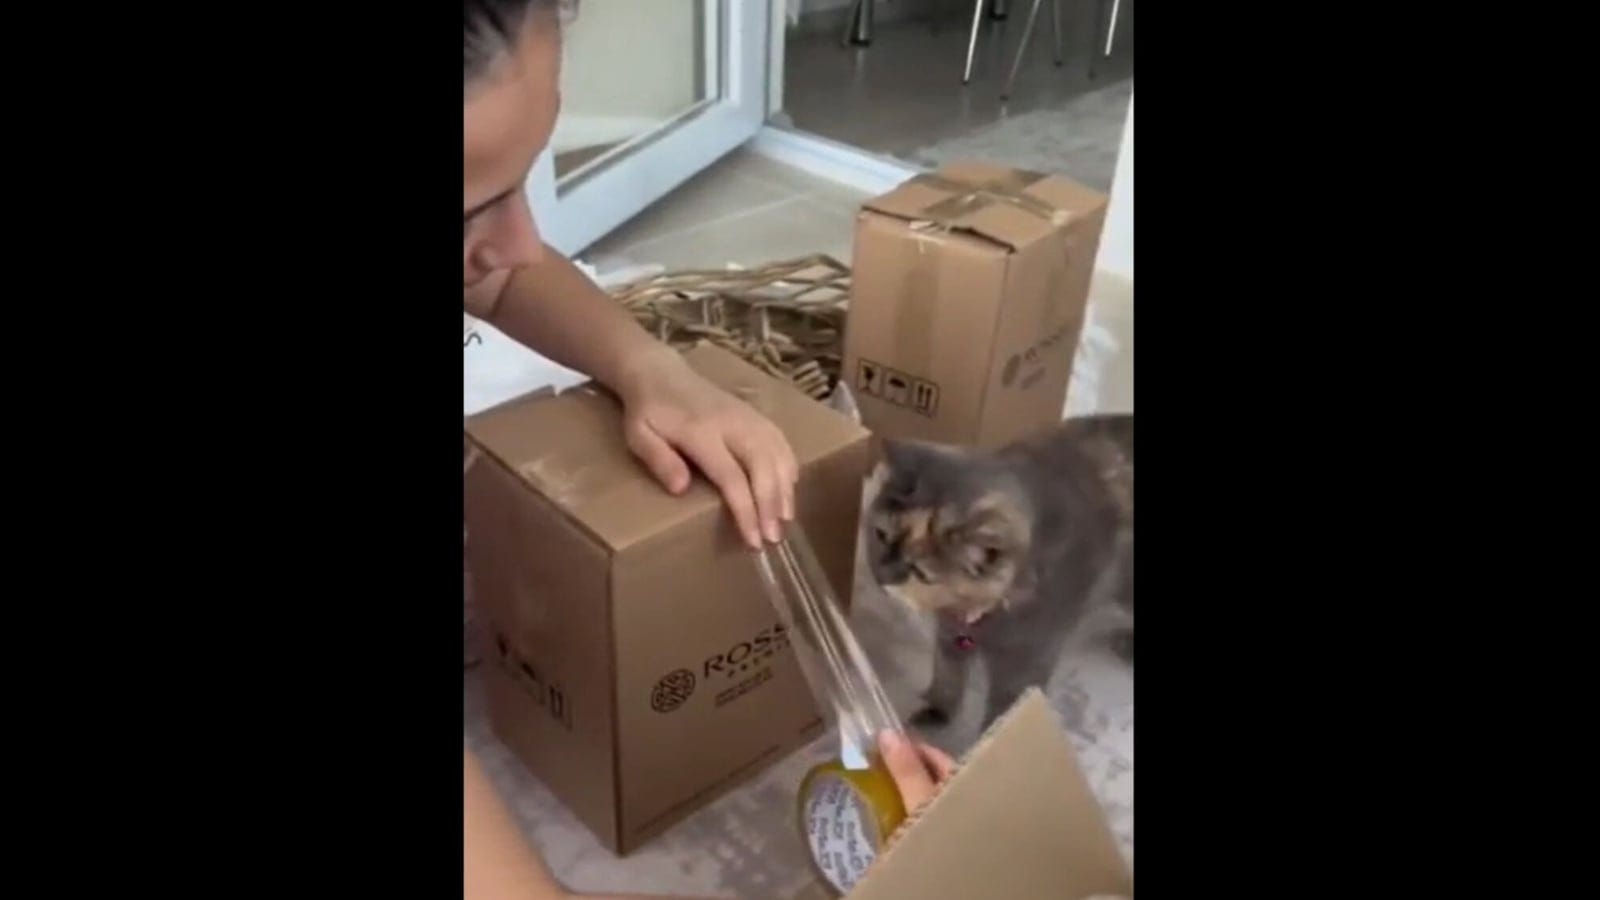 Cat cuts adhesive tape to help woman pack a box. Watch